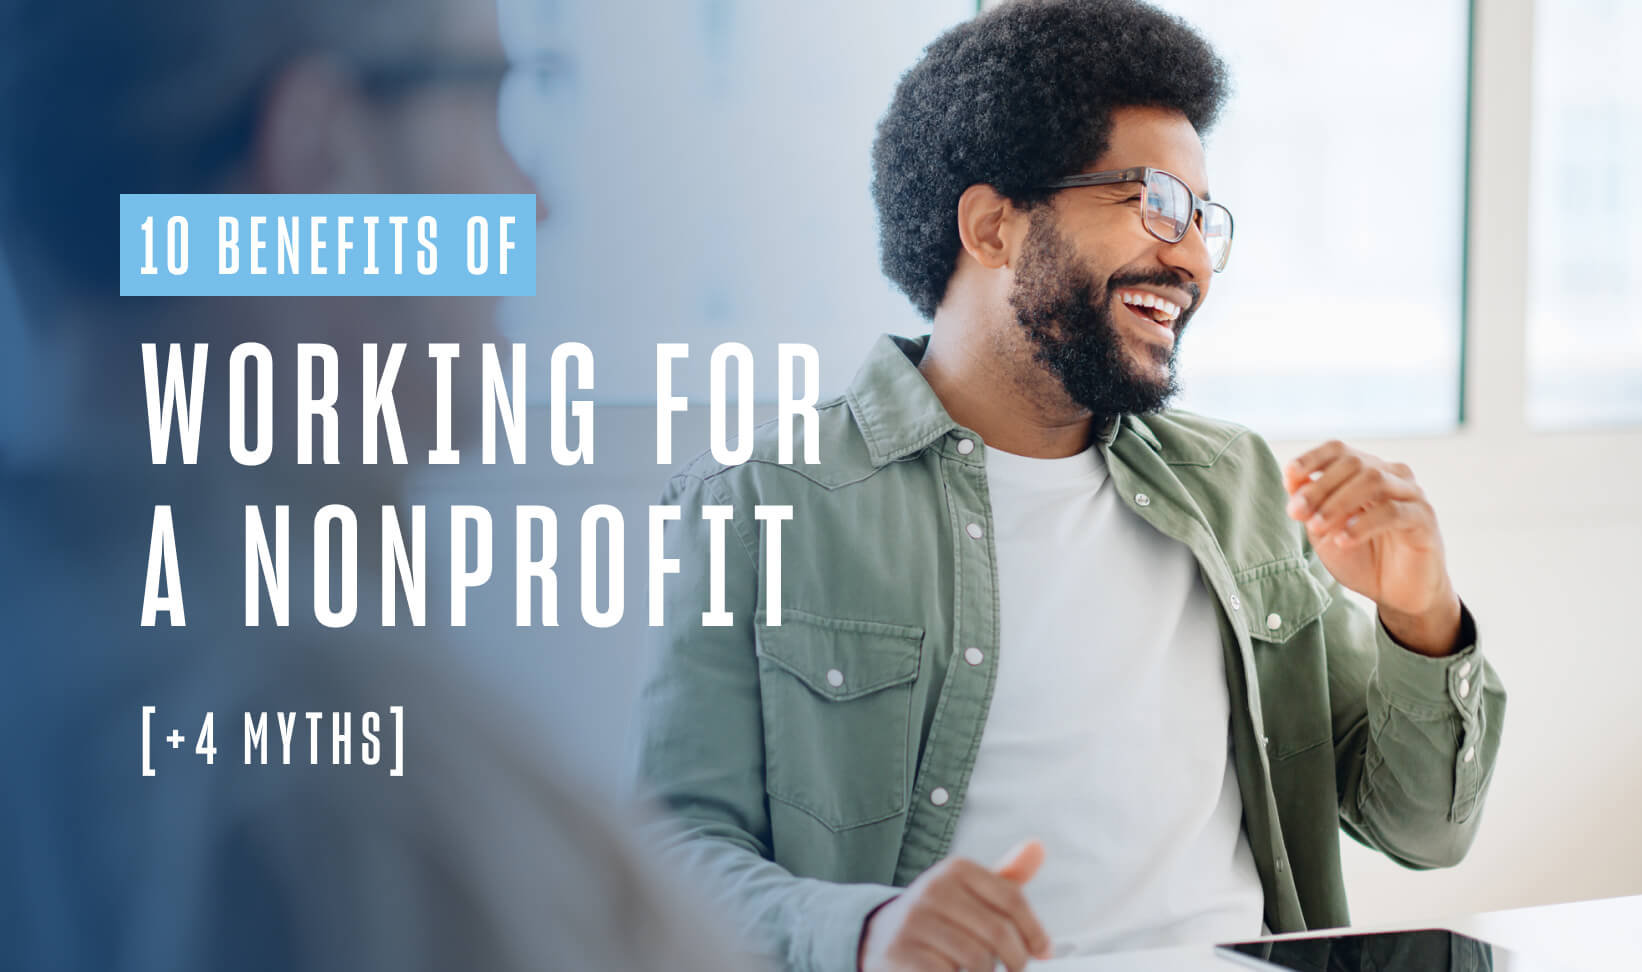 man with black hair and a black beard wearing 10 Benefits of Working for a Nonprofit [+ 4 Myths] | glasses and a green button down shirt sits at a table, smiling